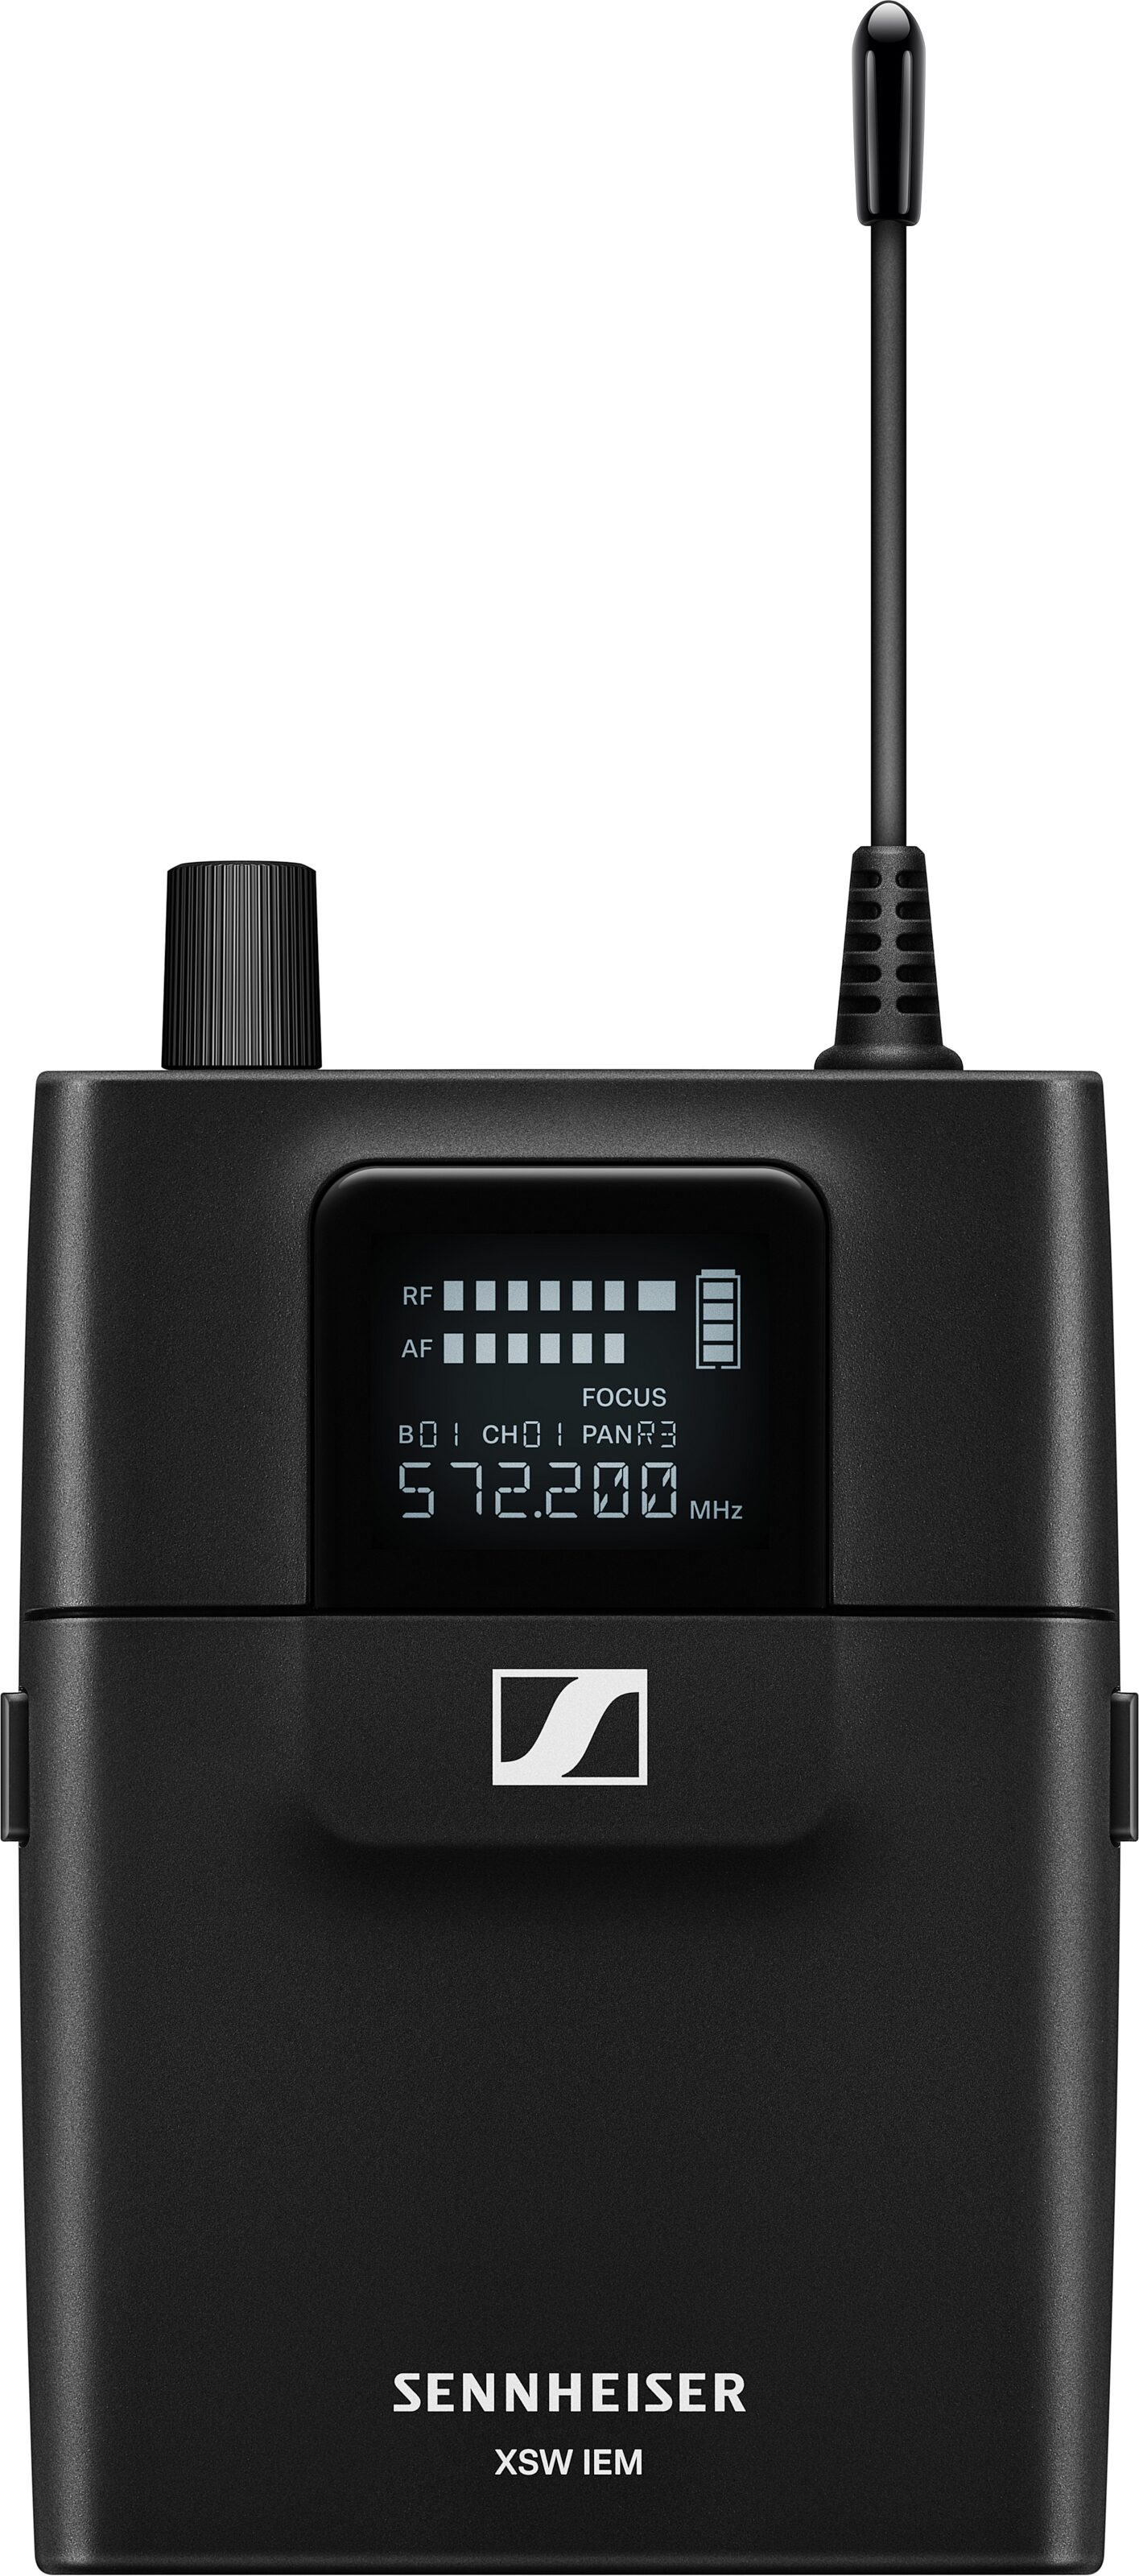 Audio　(EM-XS　Reciever　Pro　Transmitters,　Microphones　And　Wireless　Sennheiser　マイク